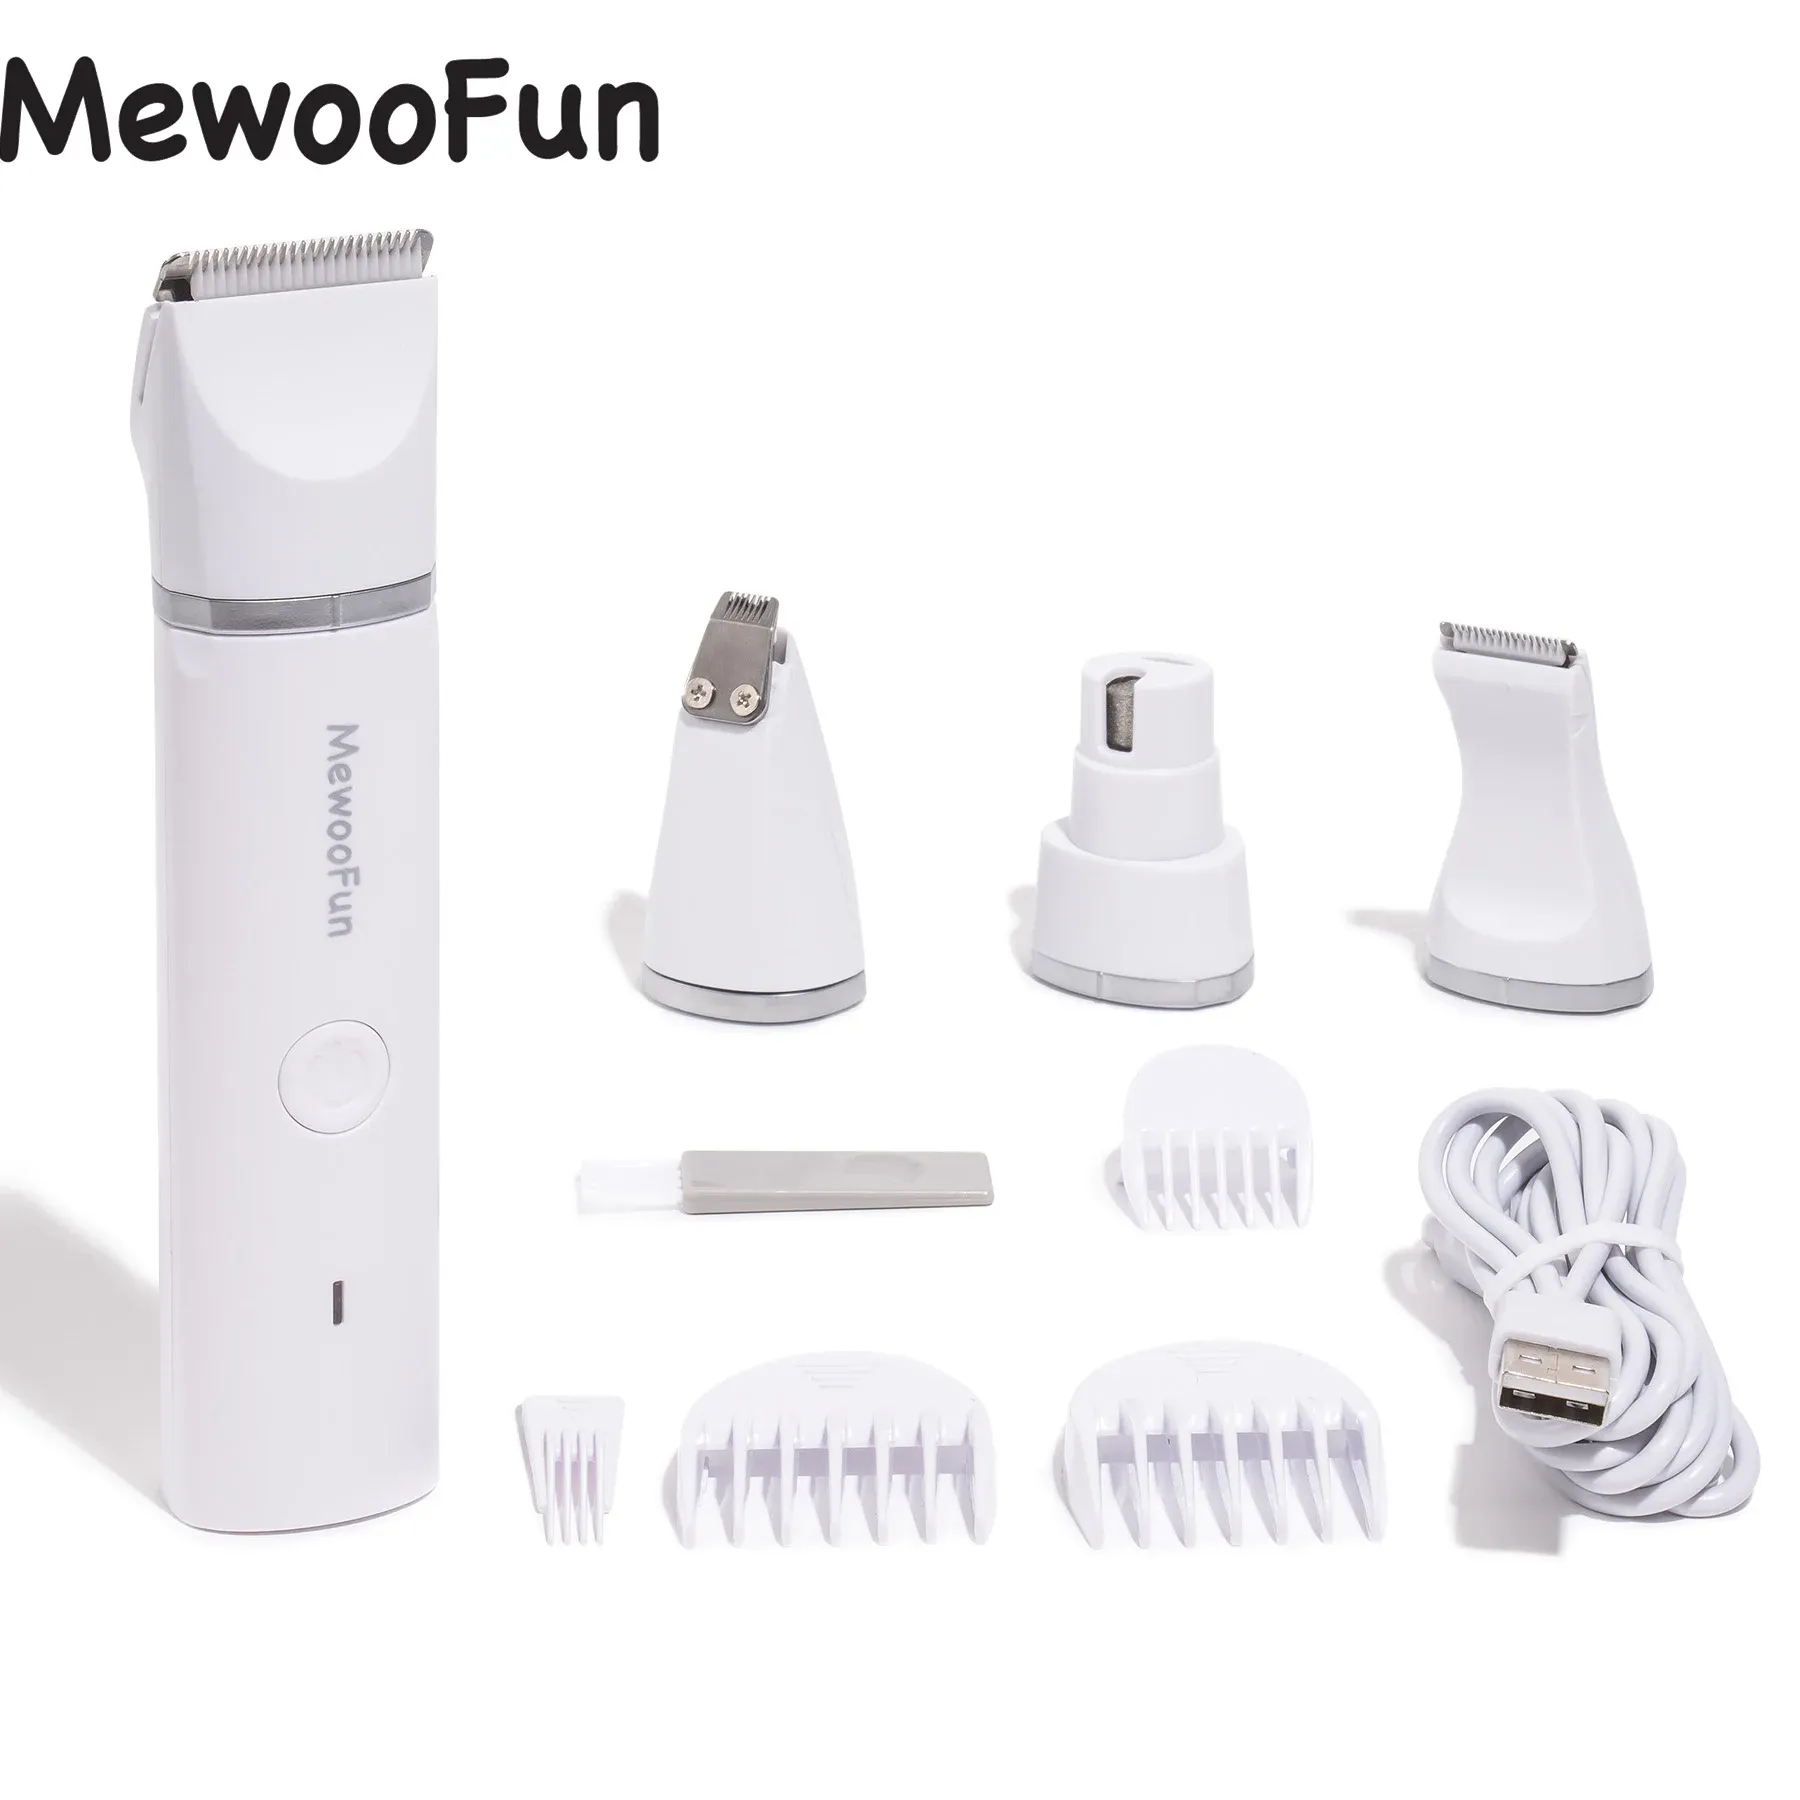 Trimmers Mewoofun 4 in 1 Pet Electric Hair Trimmer with 4 Blades Grooming Clipper Nail Grinder Professional Recharge Haircut for Dogs Cat